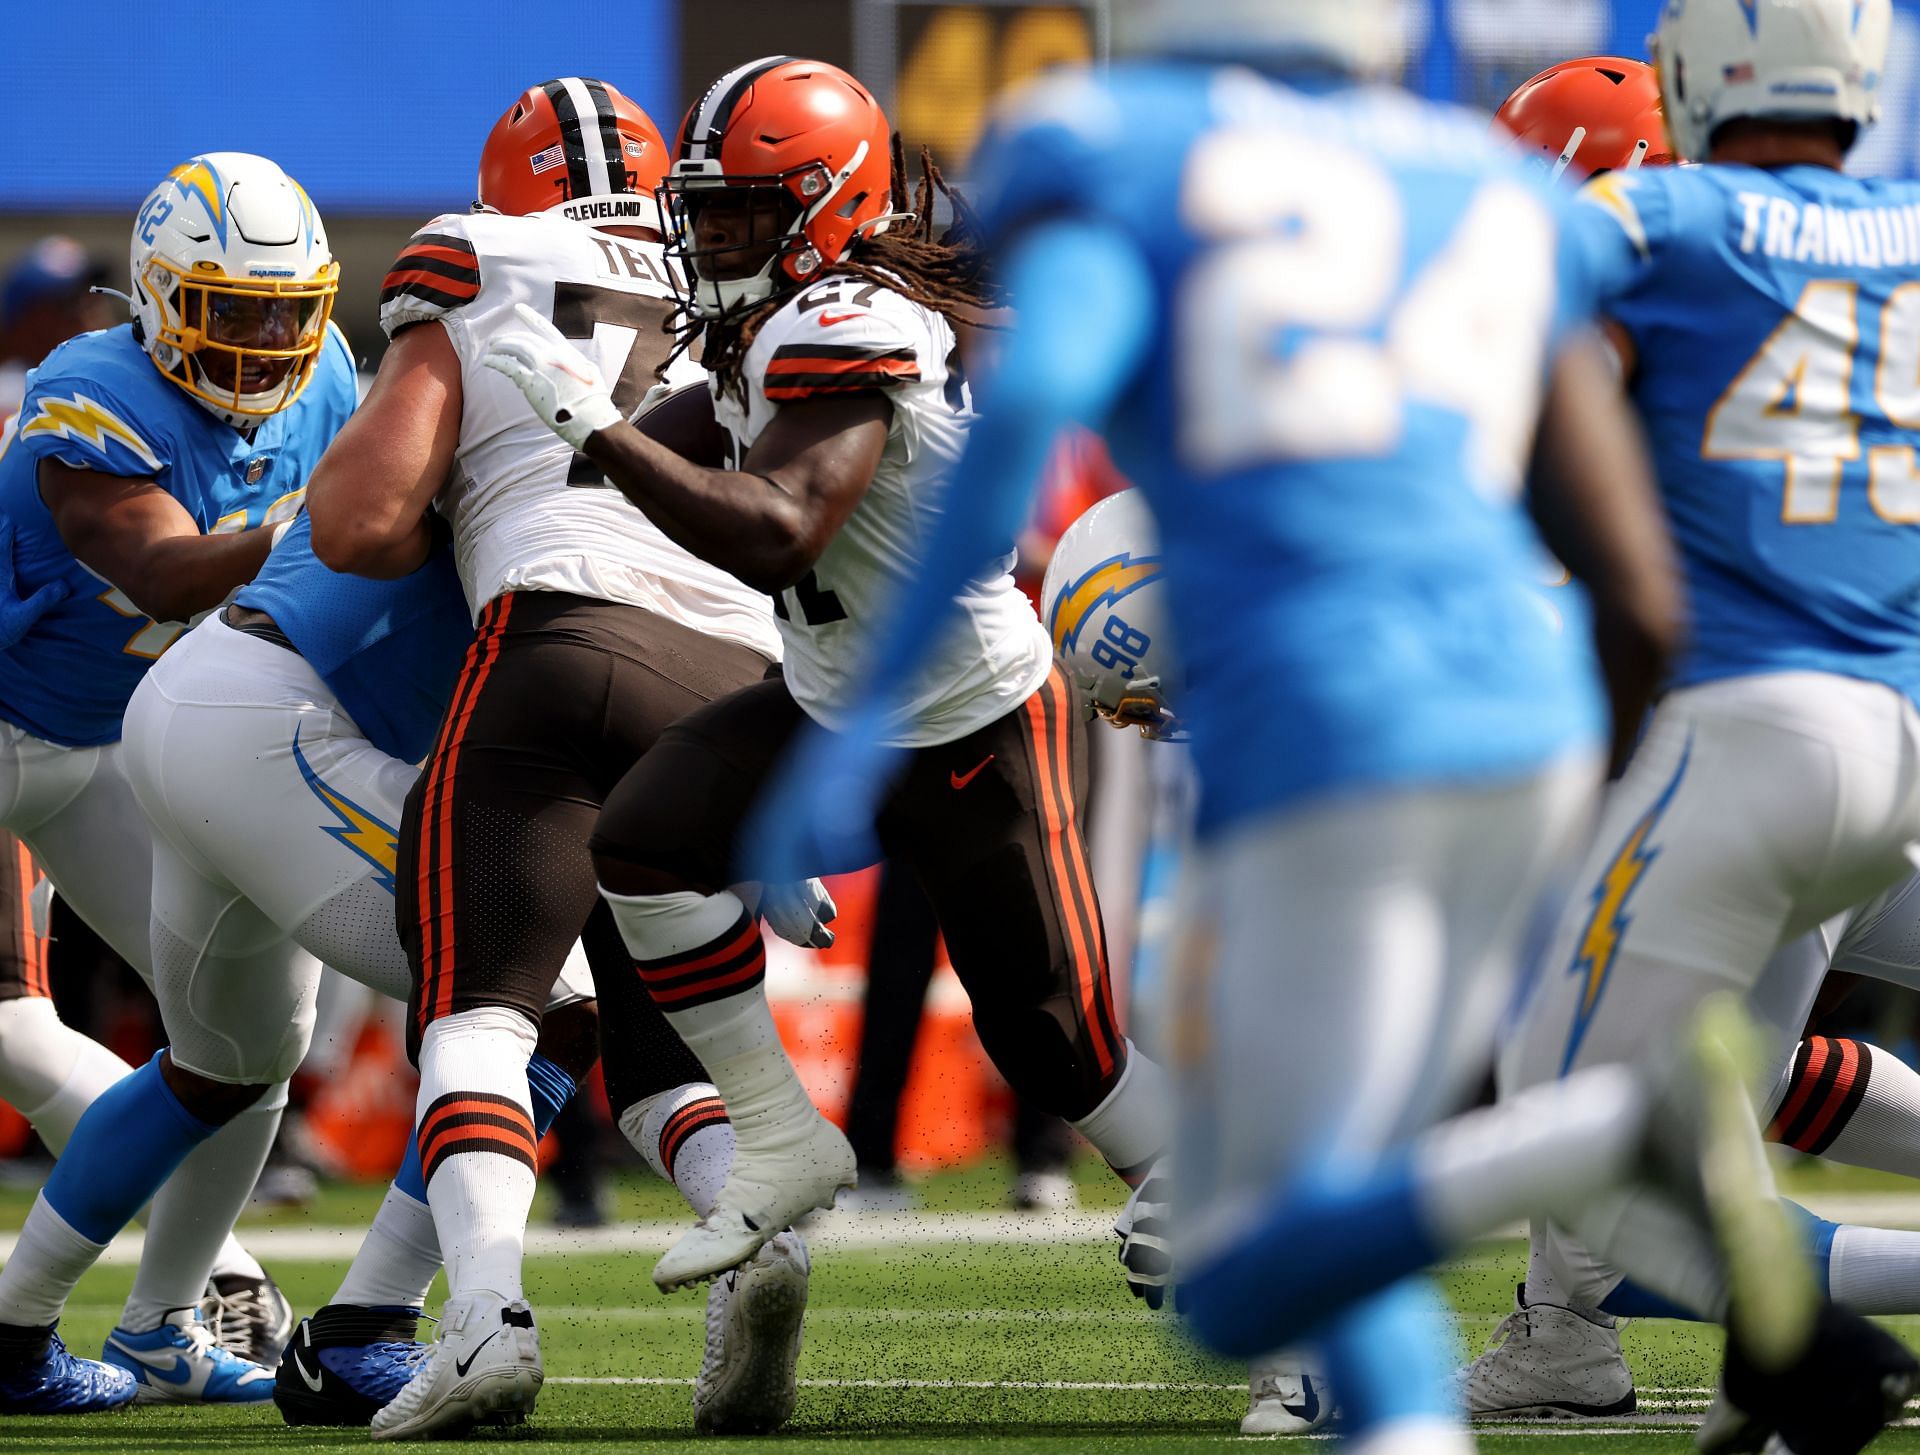 How to watch Chargers vs. Browns live stream, channel and time